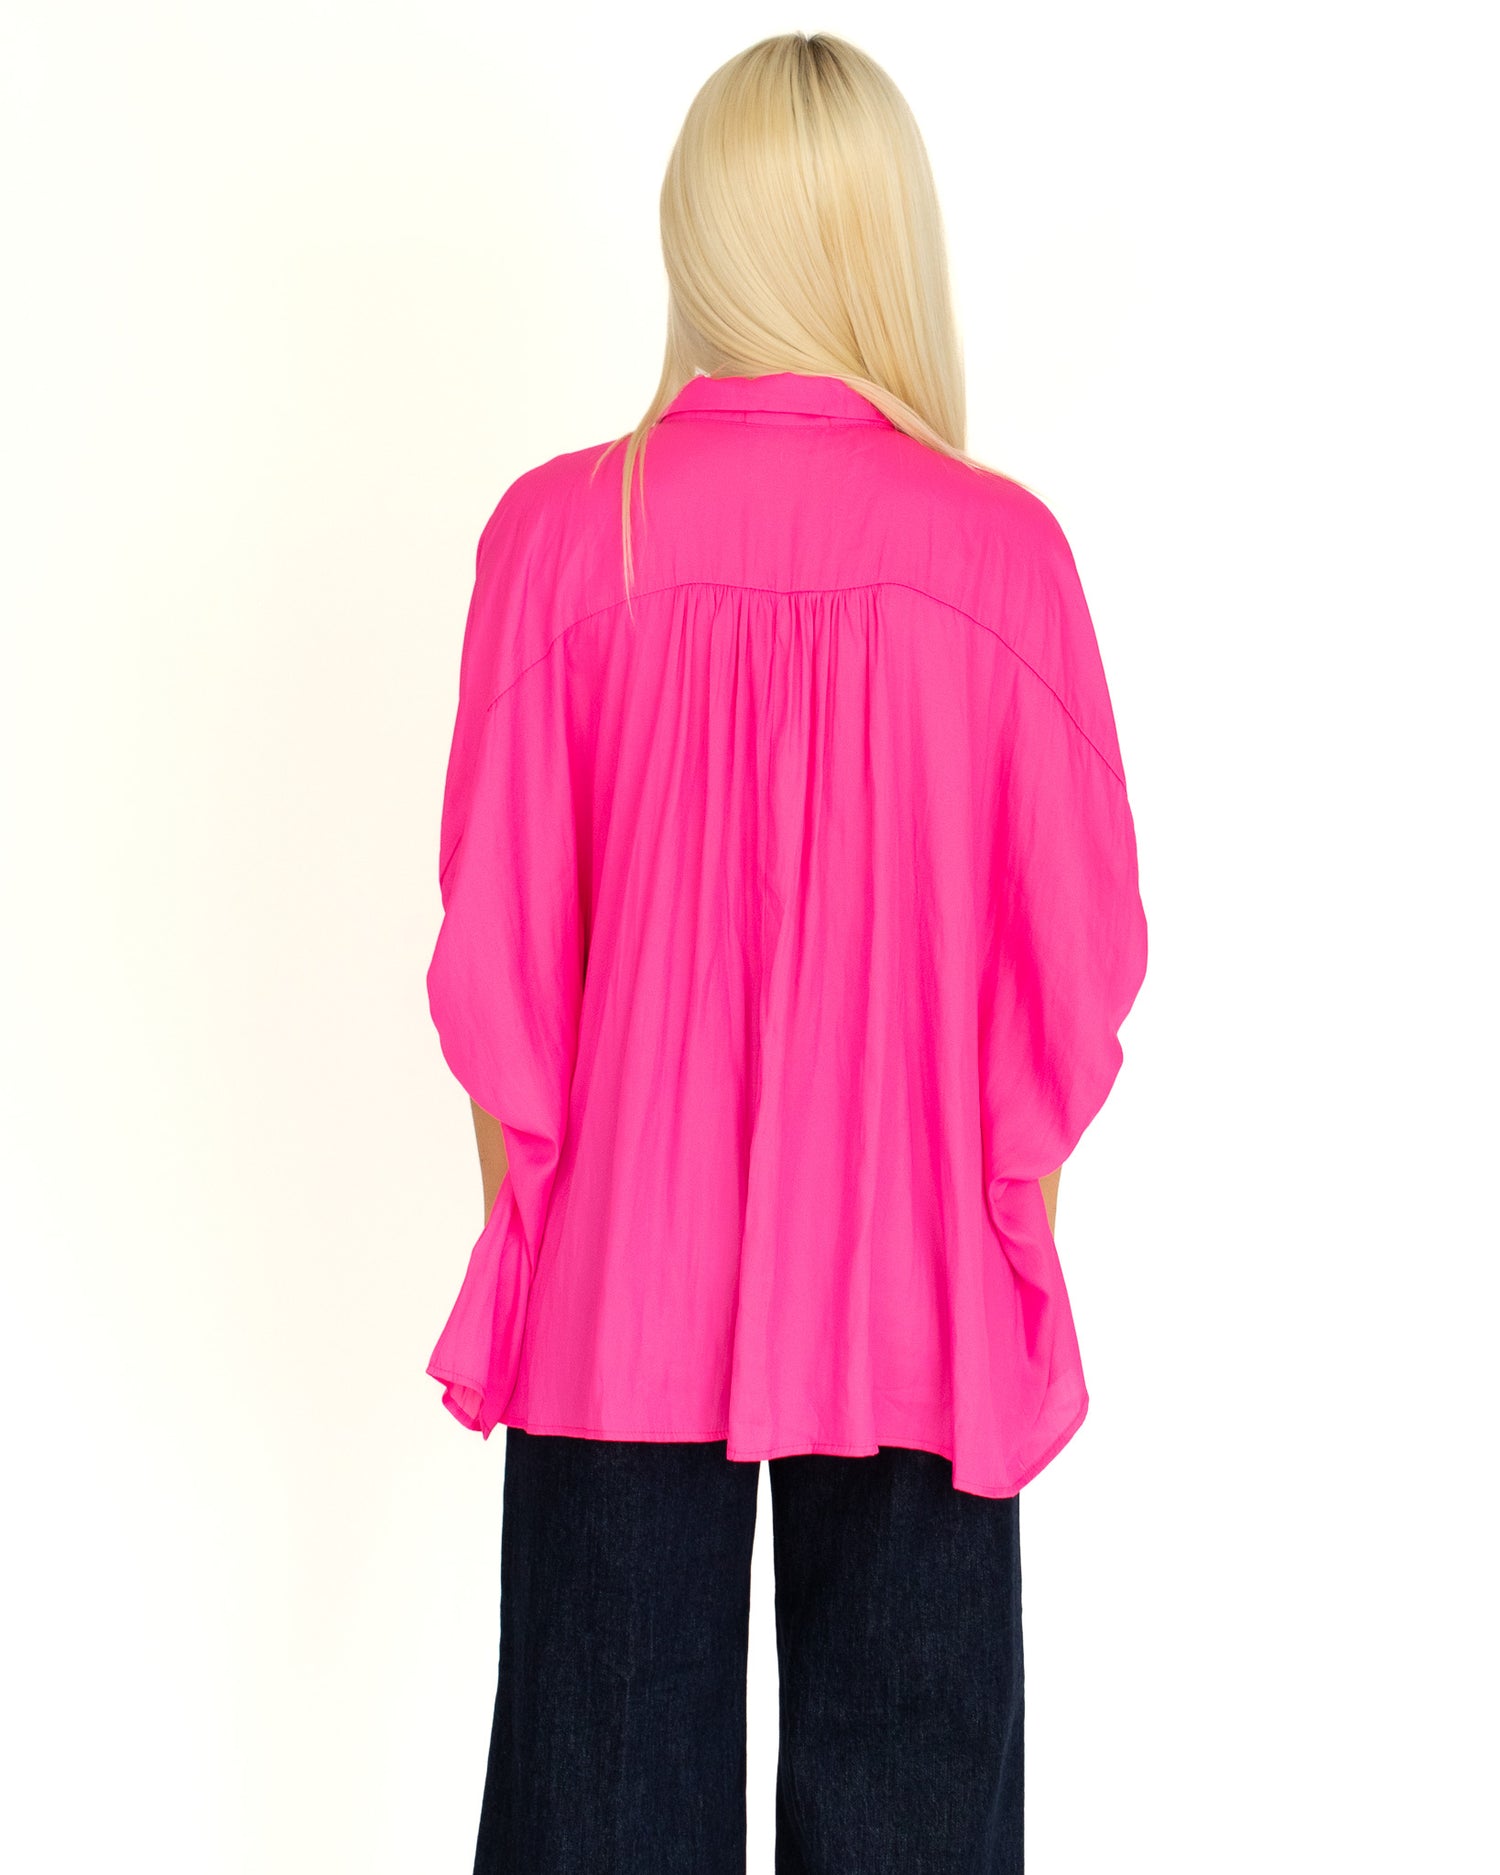 Satin Oversized Button Down - Hot Pink